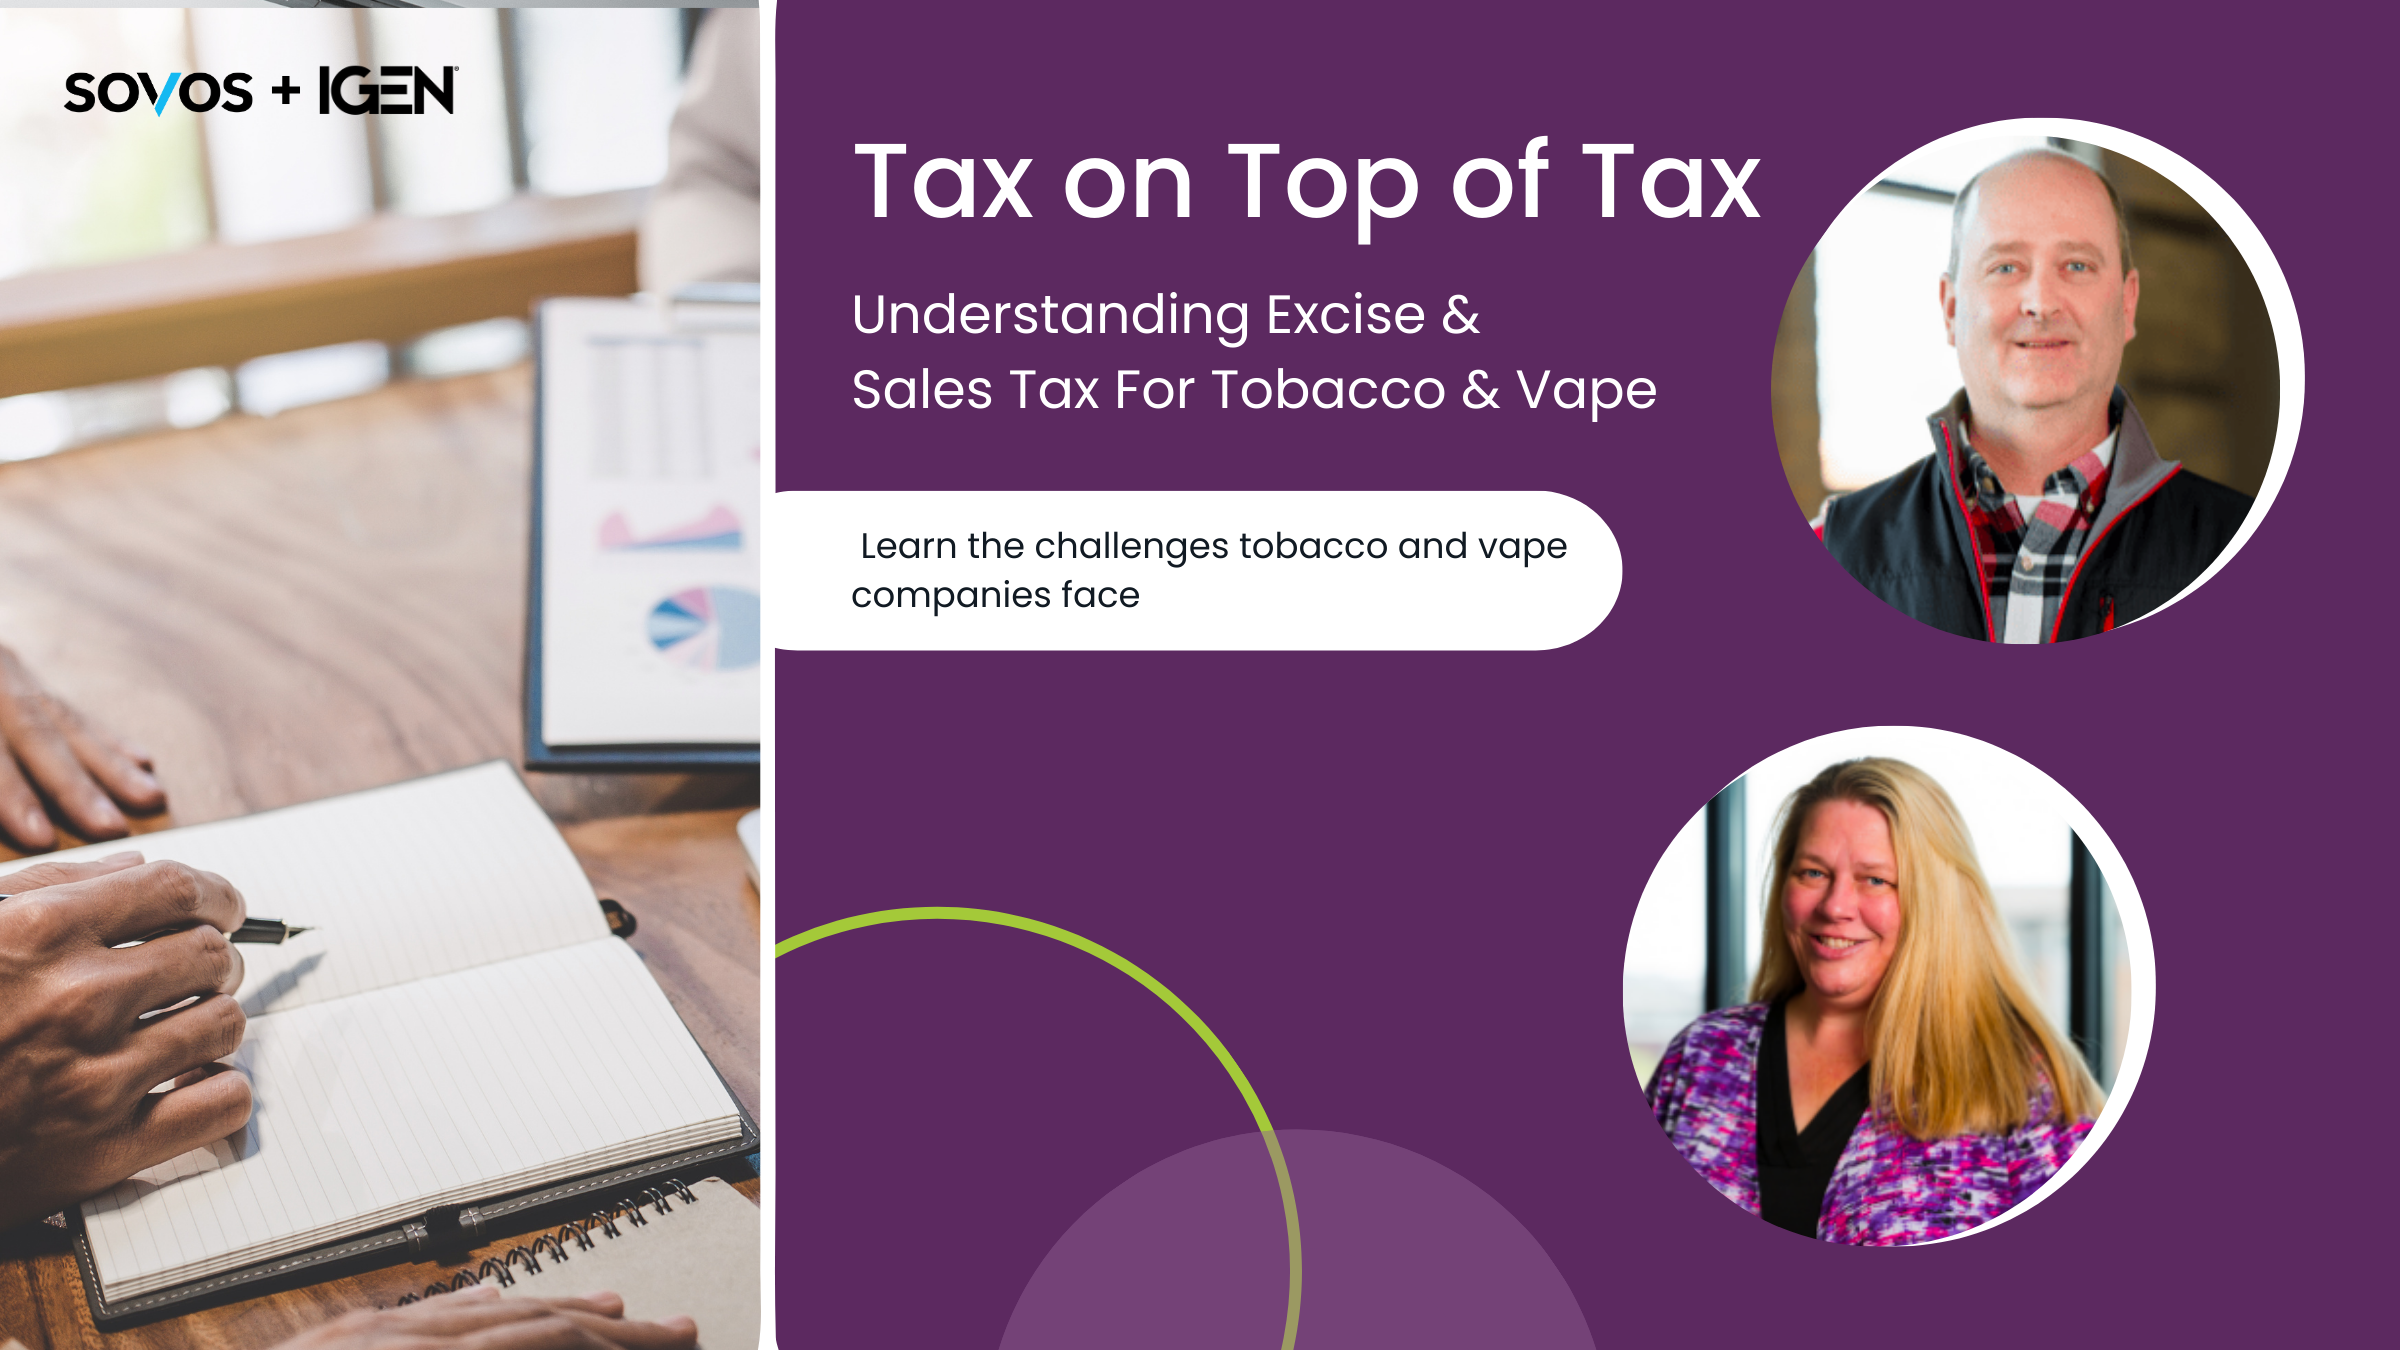 Tax on Top of Tax Understanding Excise & Sales Tax For Tobacco & Vape